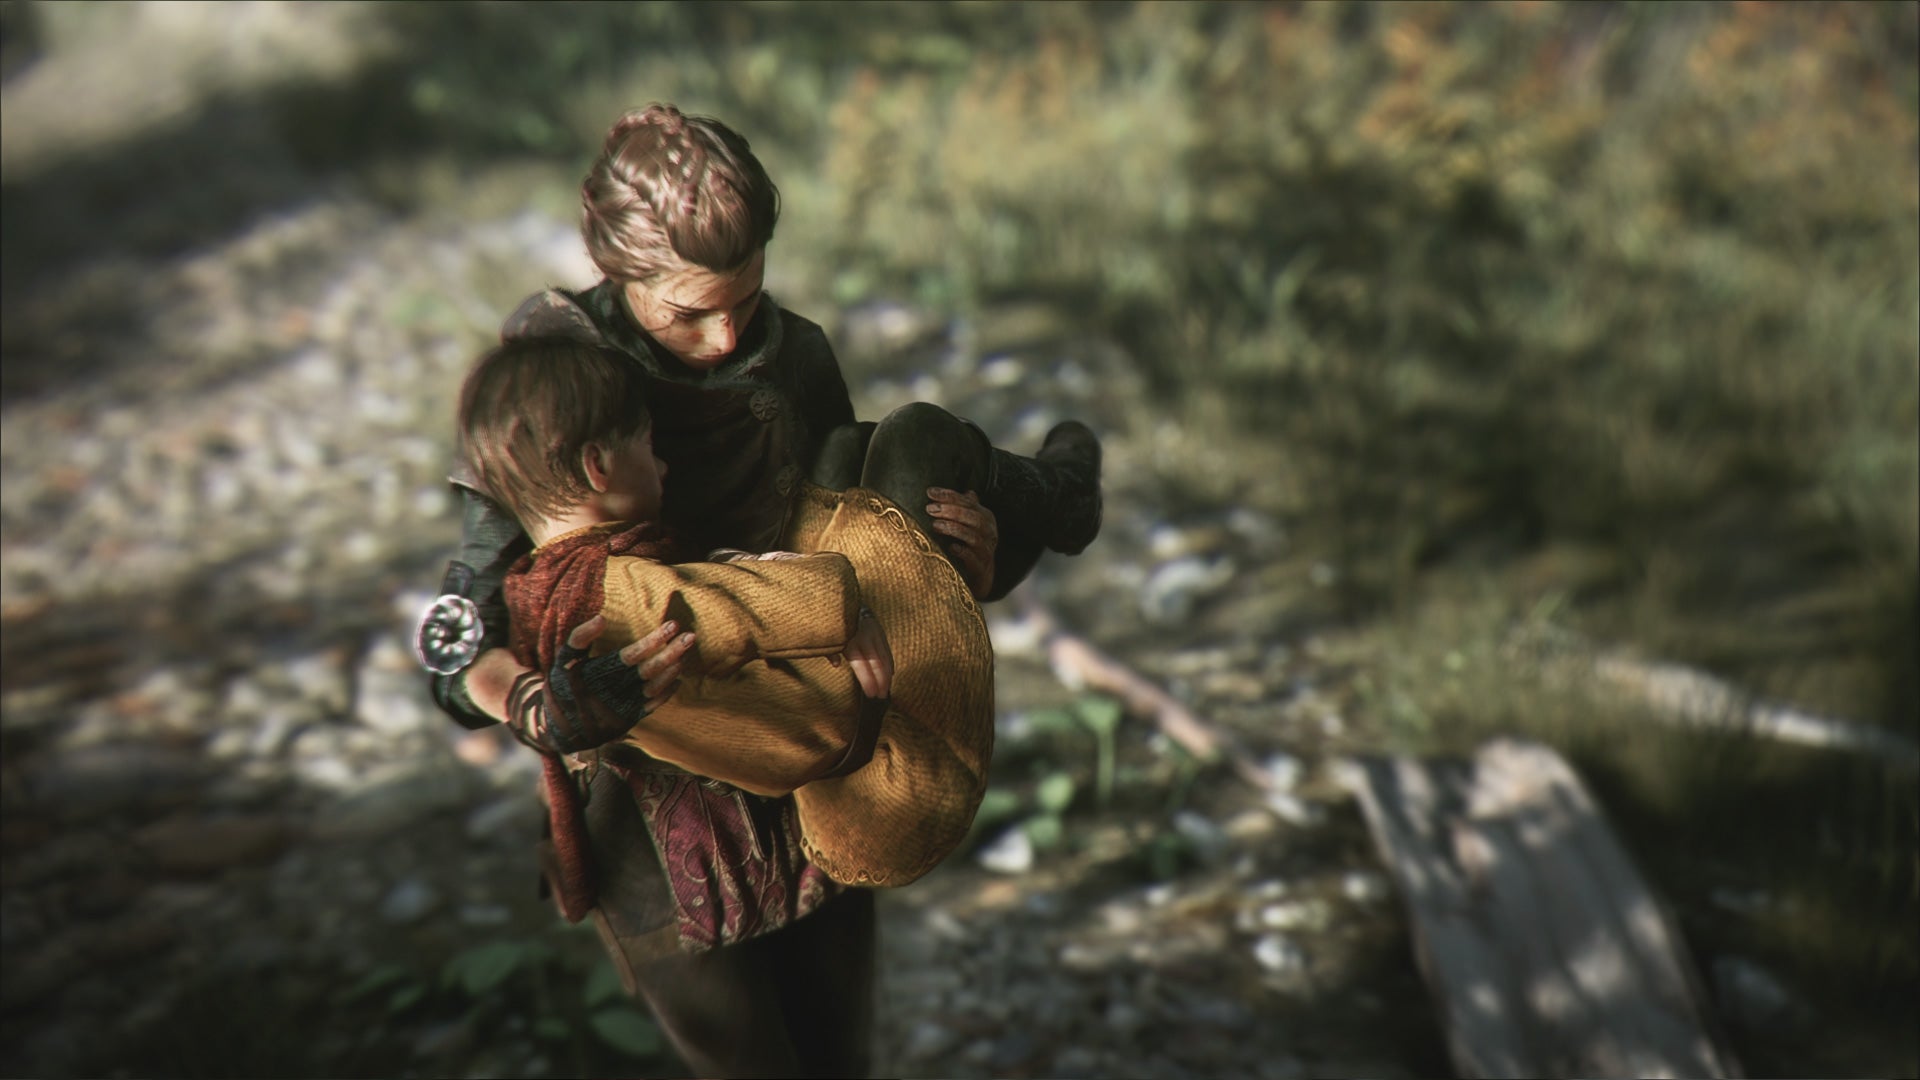 Amicia from A Plague Tale: Innocence carrying her little brother Hugo